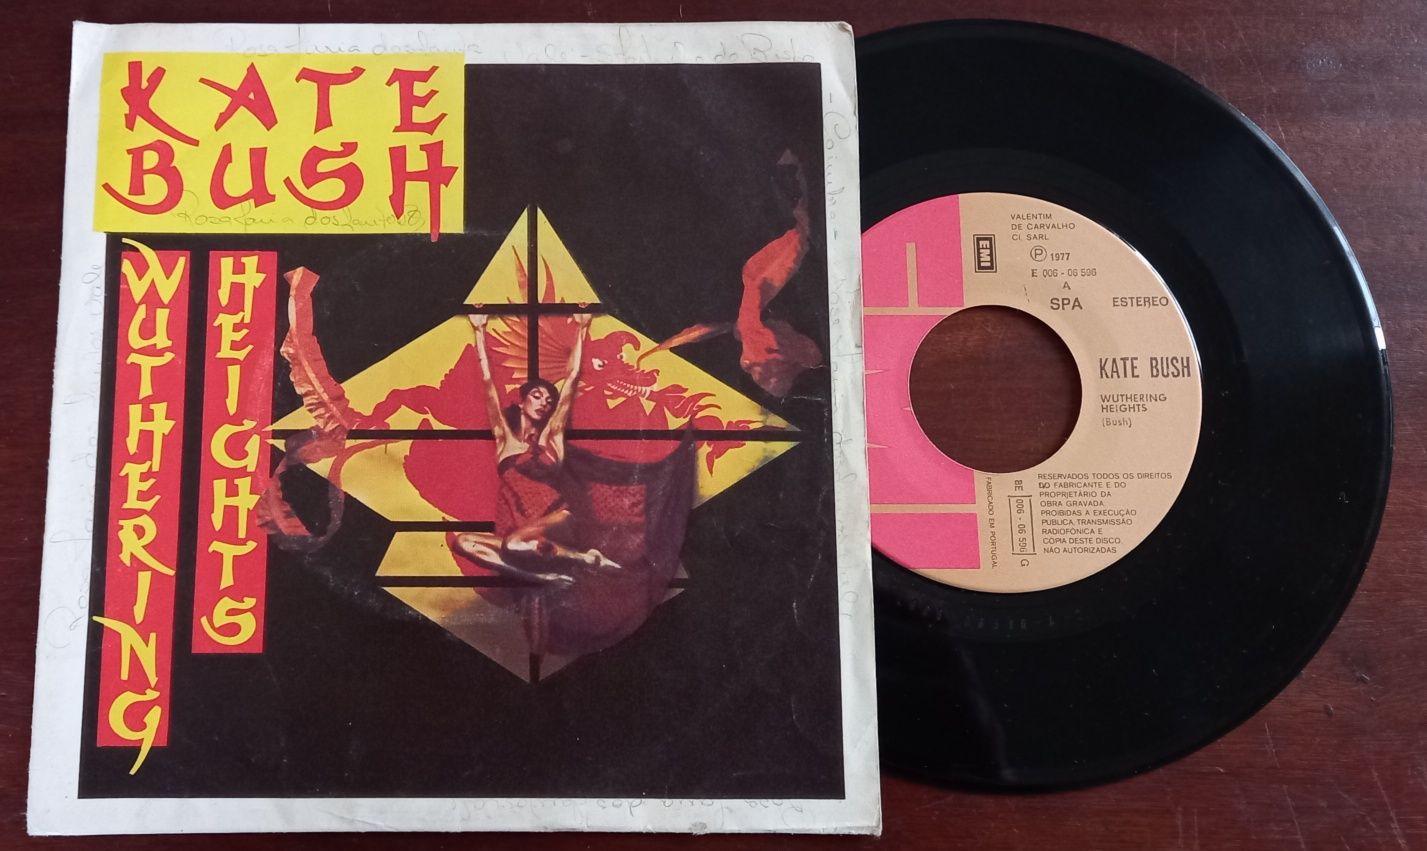 Kate Bush - Wuthering Heights - Single 7" Portugal  1978